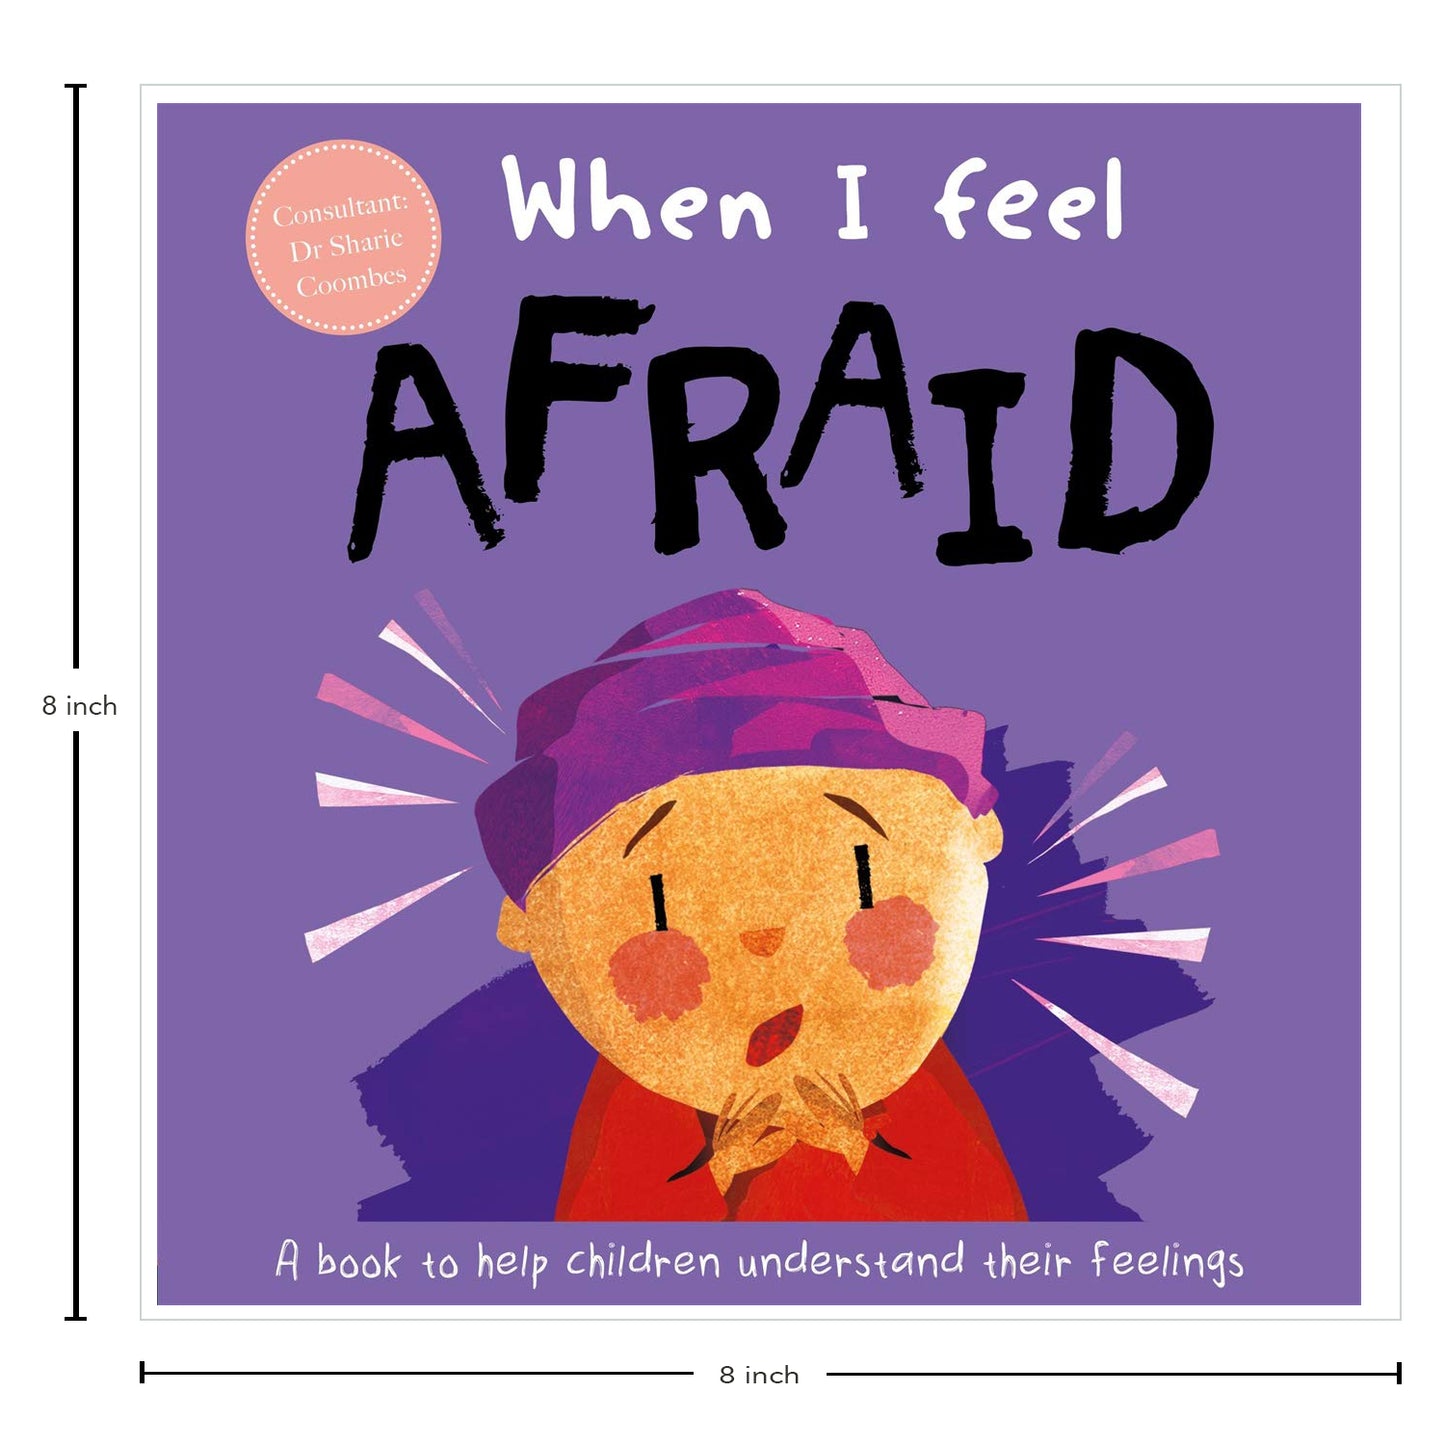 When I Feel Afraid (A Children's Book about Emotions) [Hardcover] Coombes, Dr Sharie